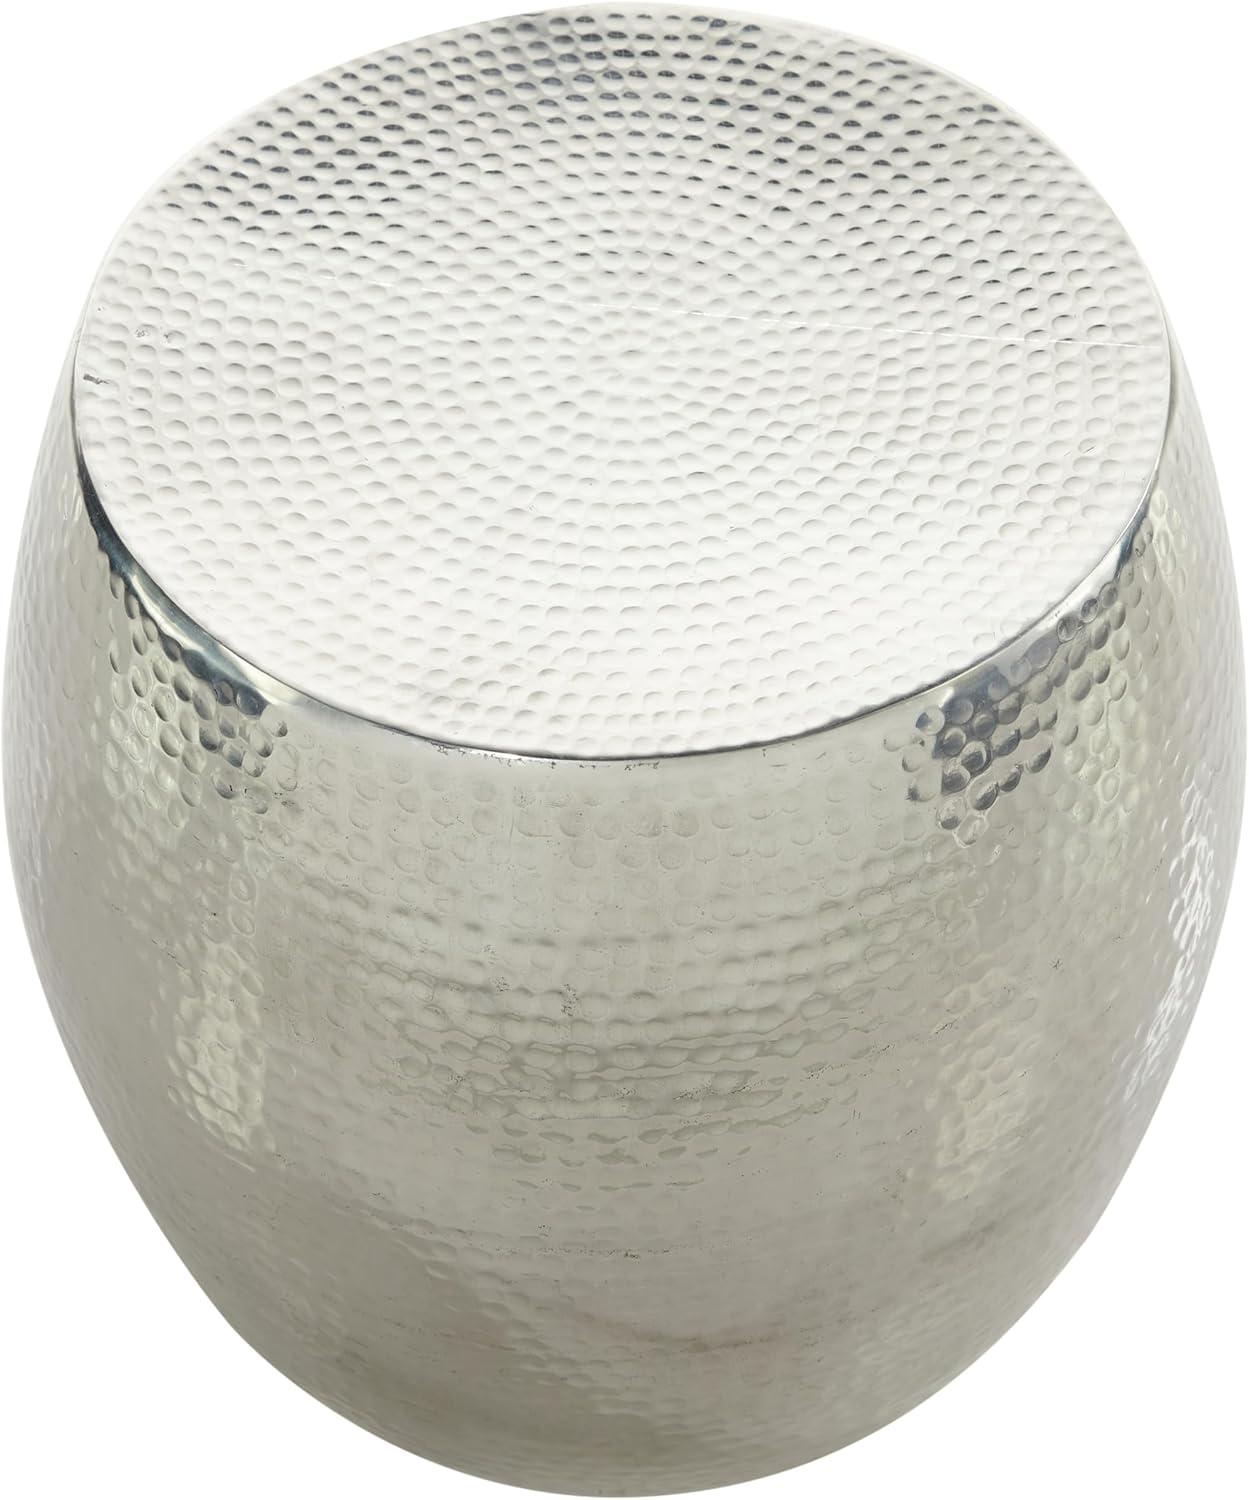 Elegant Round Hammered Silver Metal Accent Table